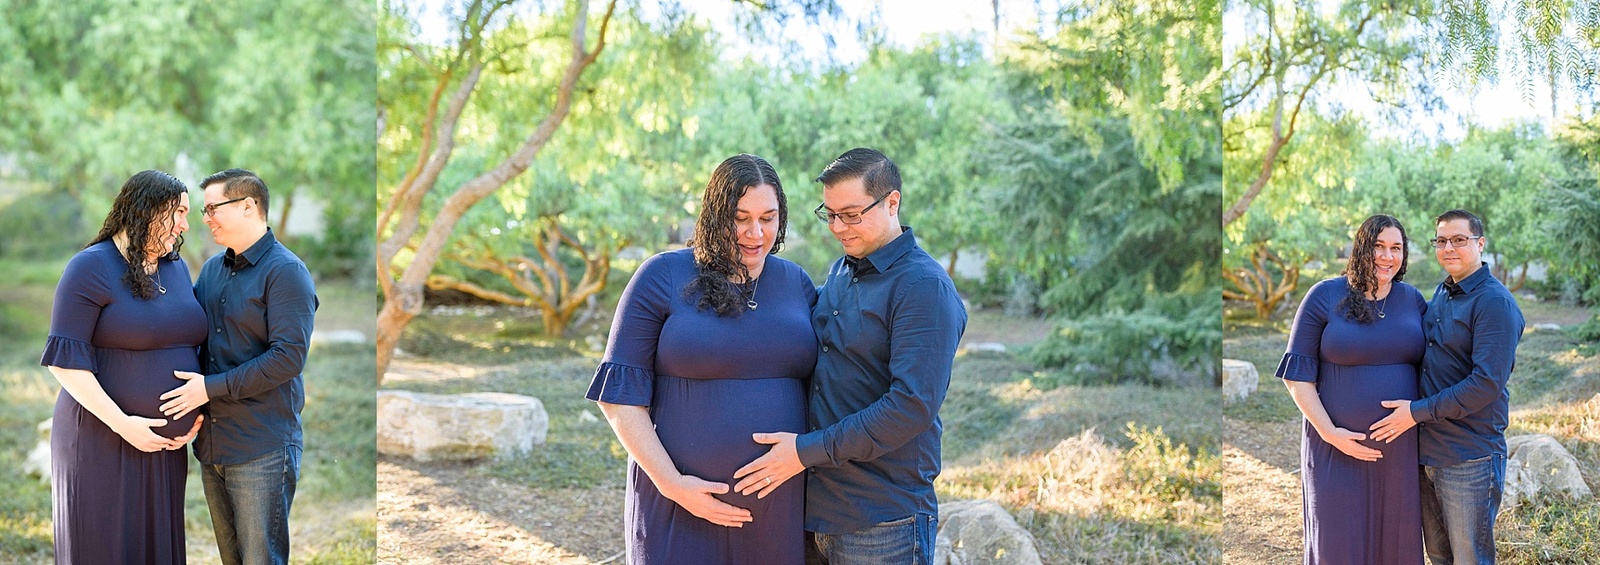 Wooded maternity photo in the South Bay